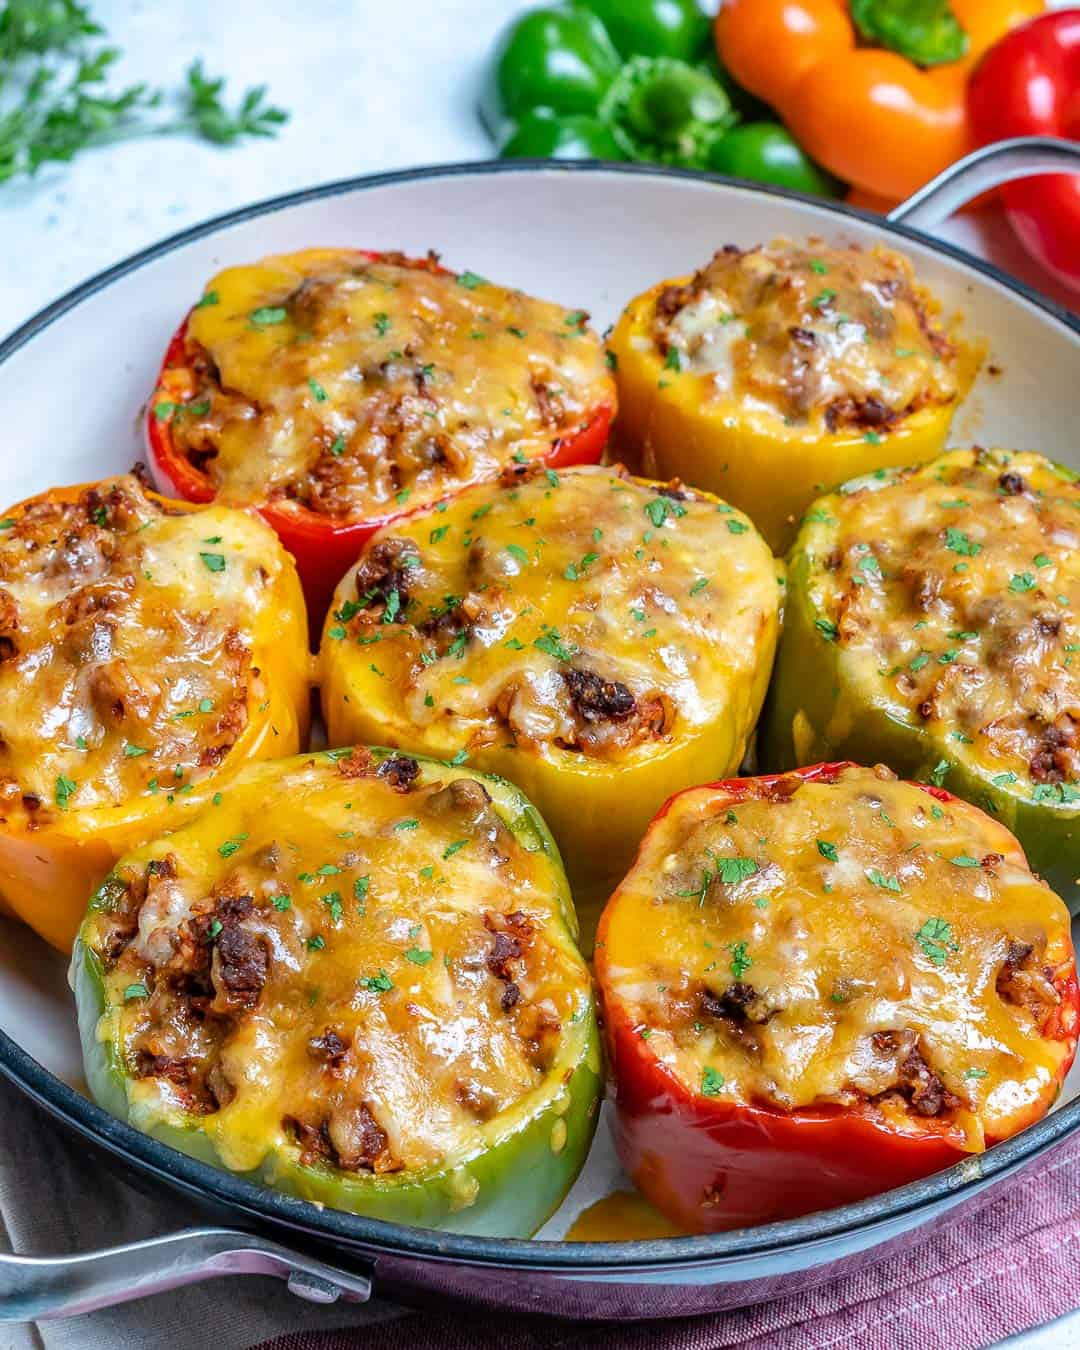 Easy Stuffed Peppers Recipe | Healthy Fitness Meals